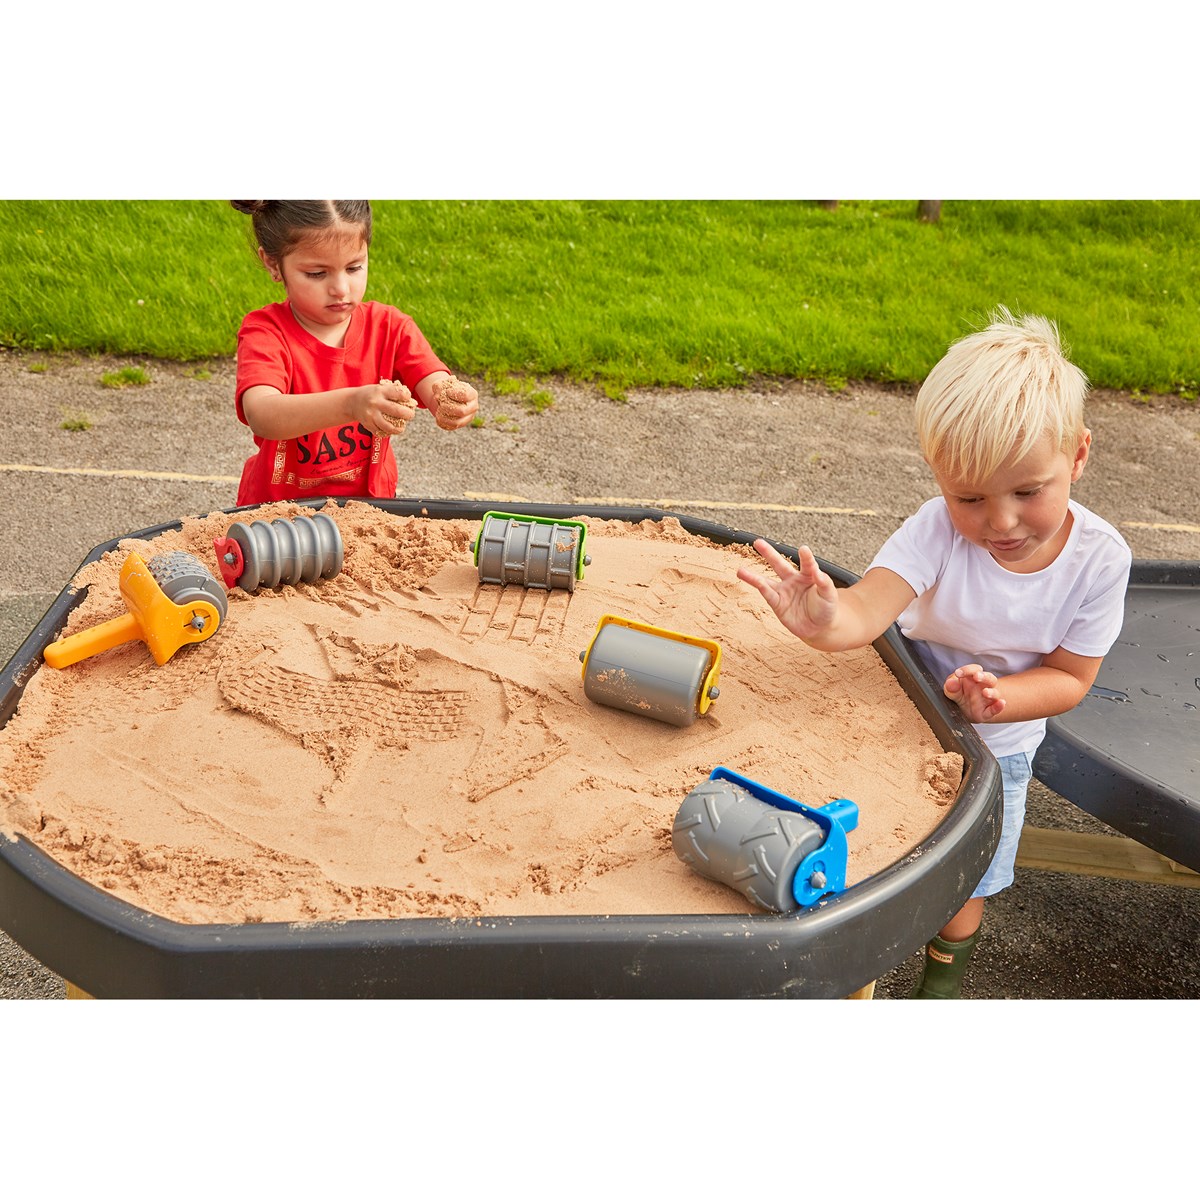 12kg Bag of Play Sand, Messy Play Accessor